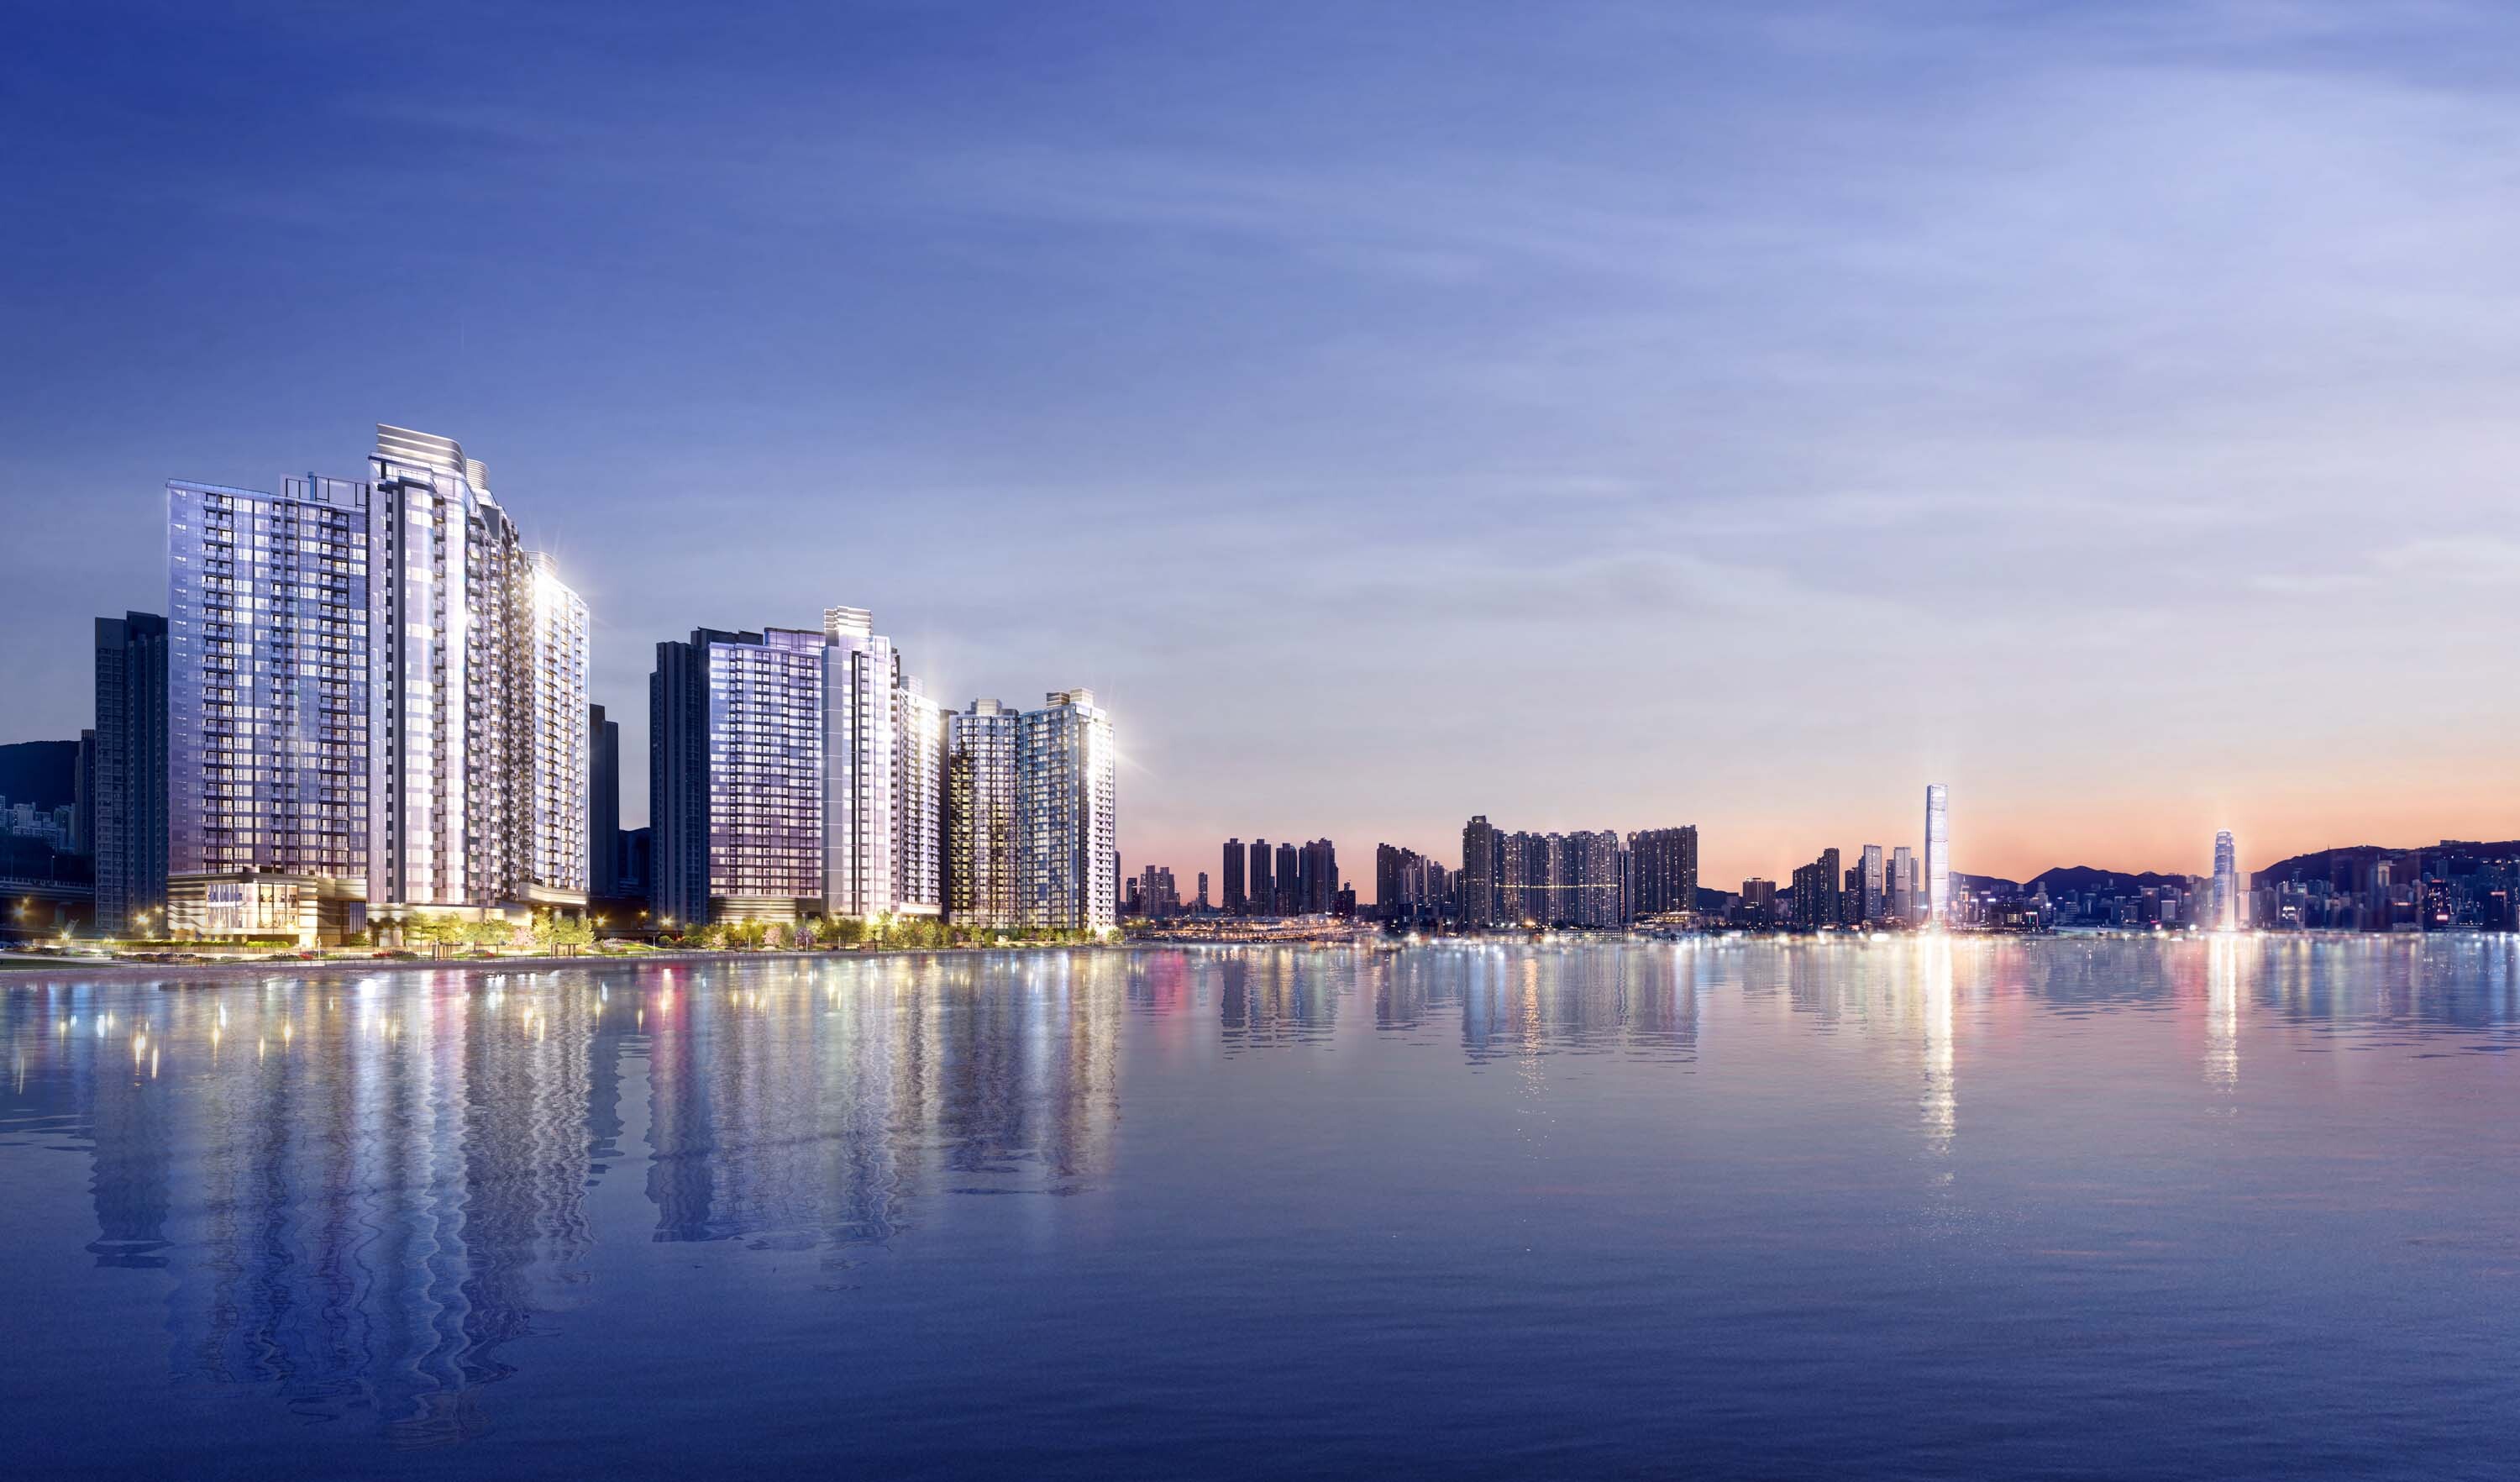 An artist’s impression of Grand Victoria, a luxury Hong Kong harbourfront residential property, which is being built by the developers Sino Land, Wheelock Properties, K. Wah International, Shimao Property and SEA Group.